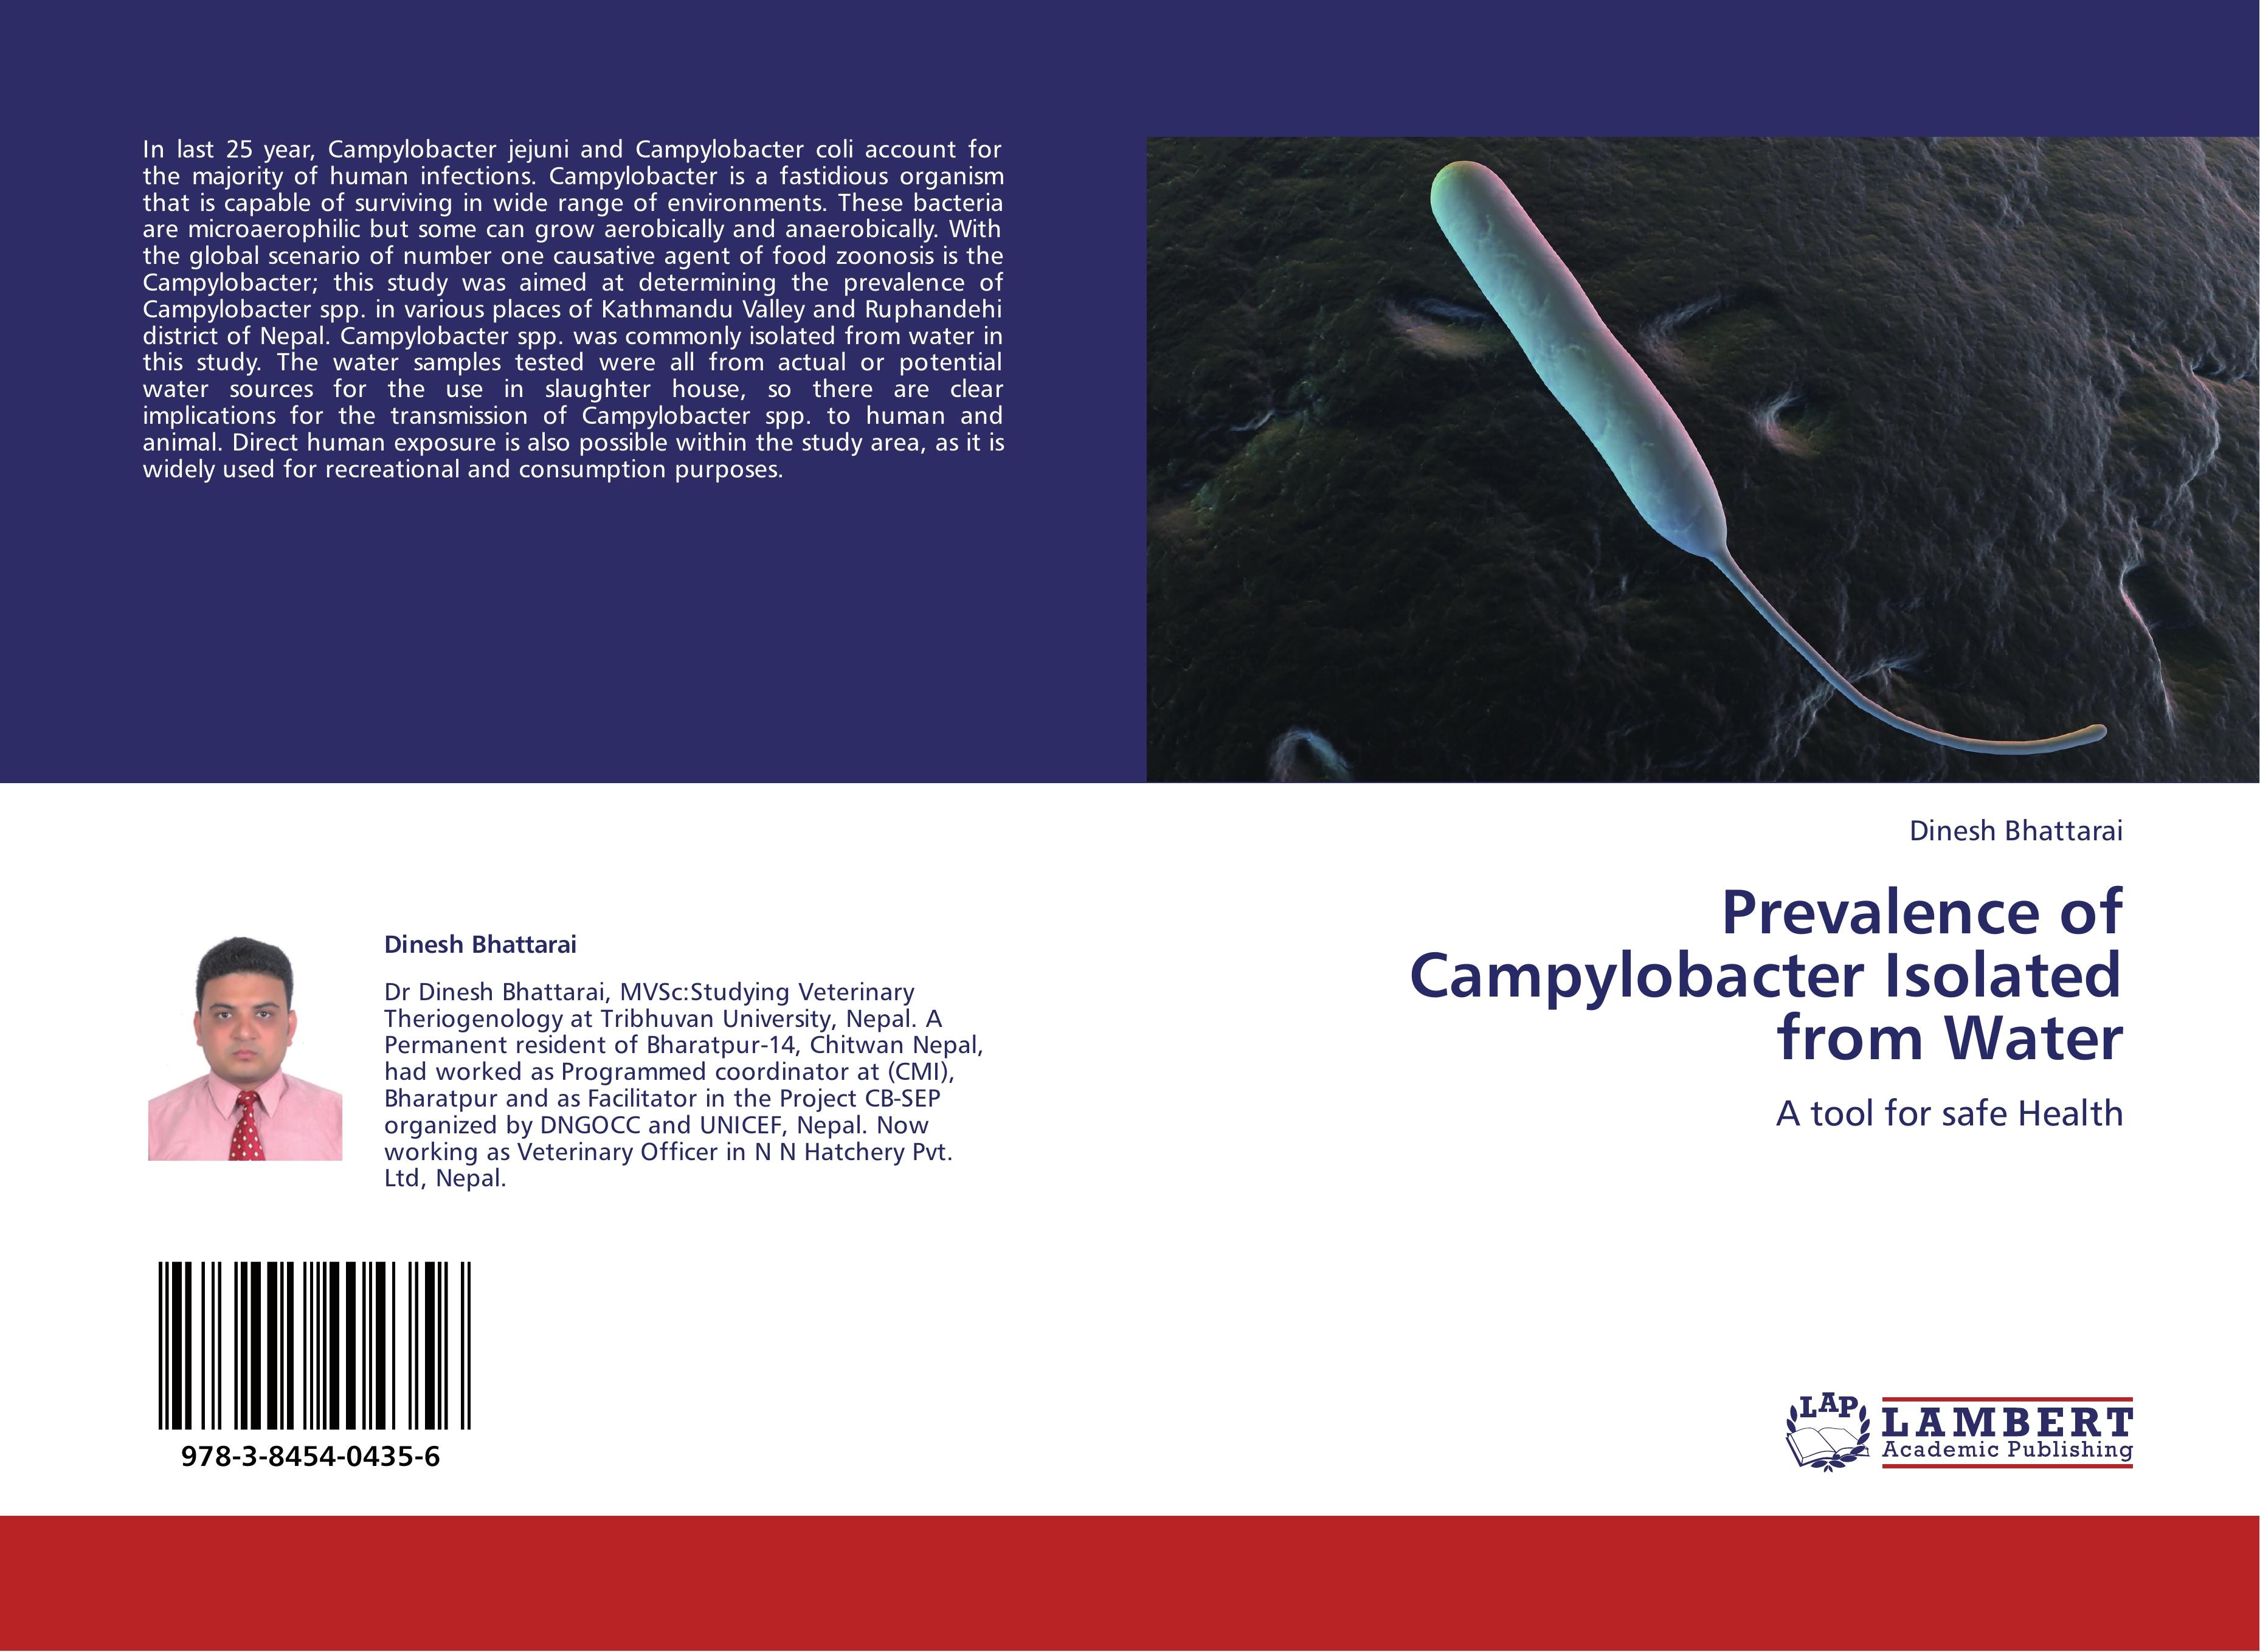 Prevalence of Campylobacter Isolated from Water - Dinesh Bhattarai